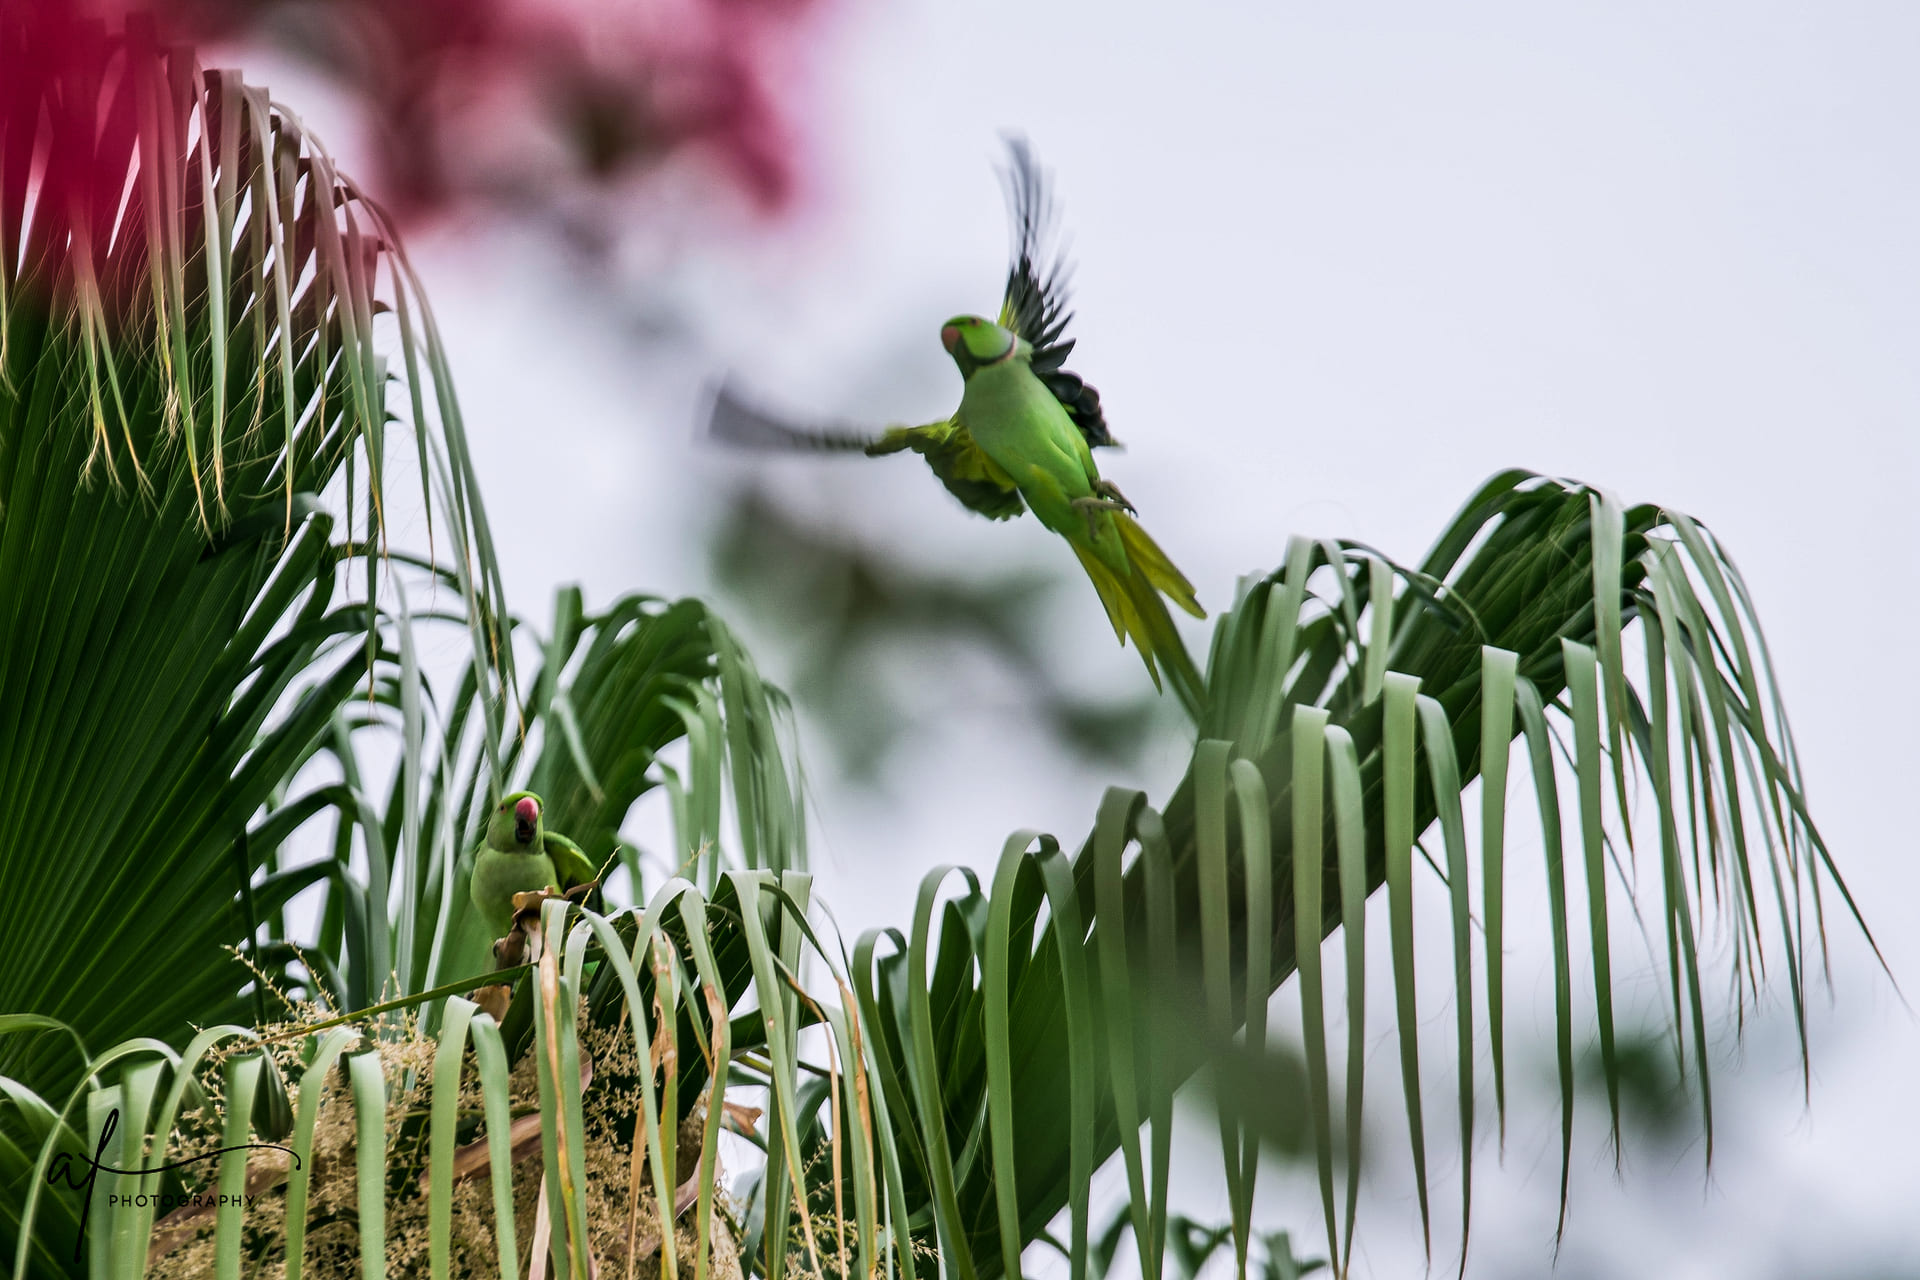 African collared parakeets